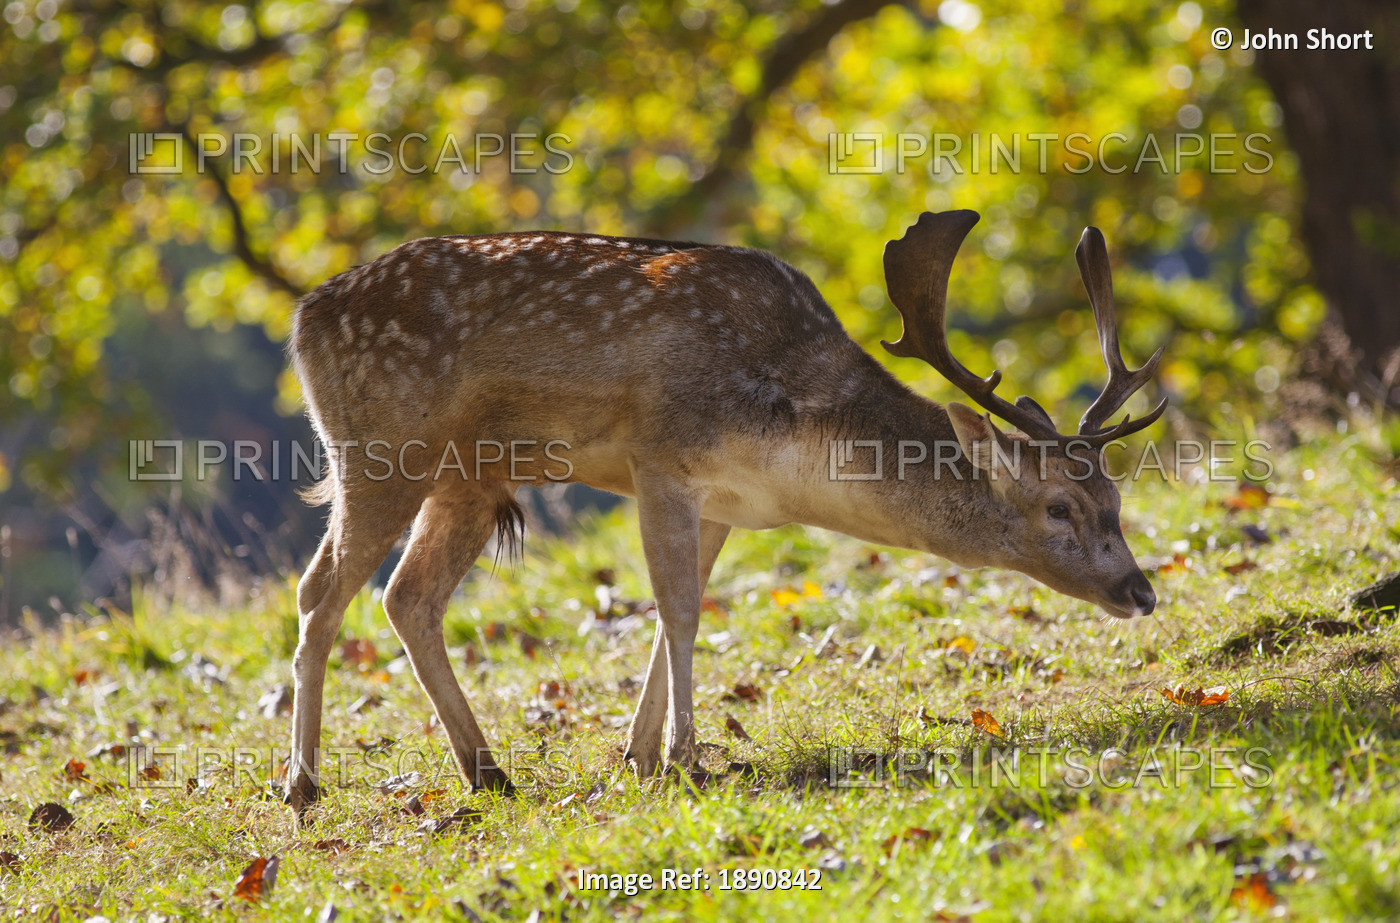 A Deer With Antlers Grazing On The Grass; North Yorkshire, England